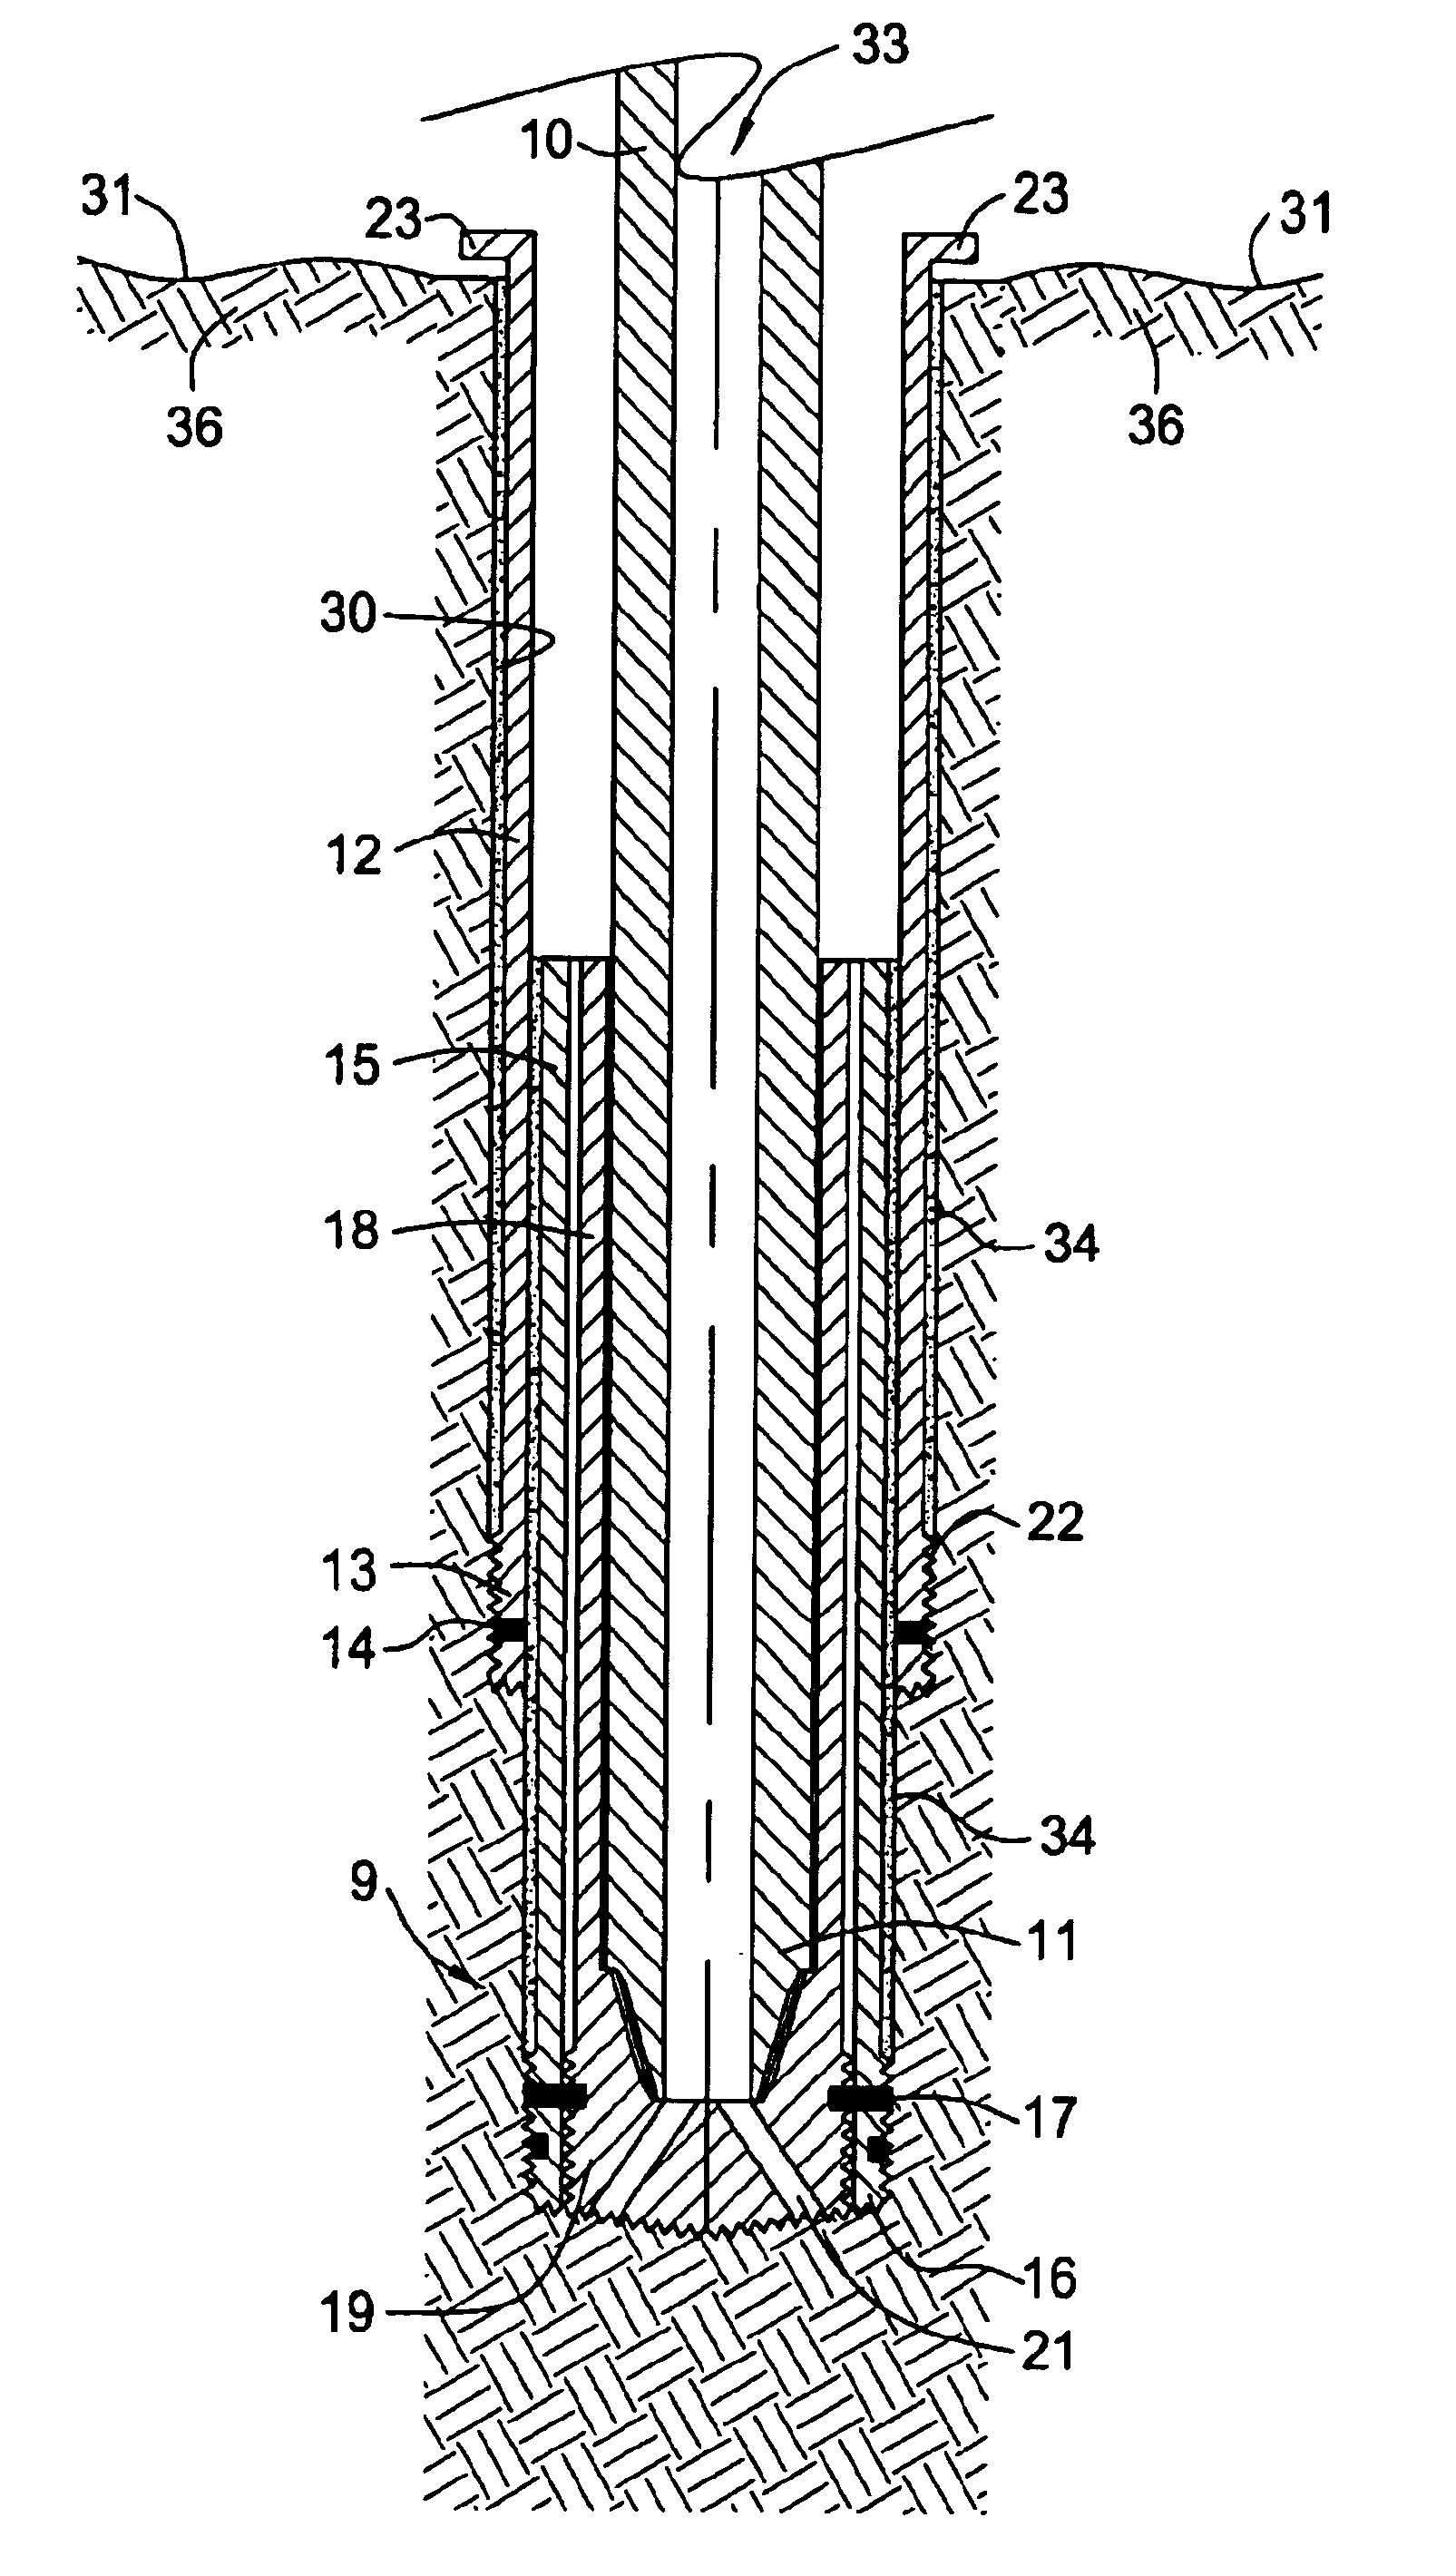 Drilling with concentric strings of casing